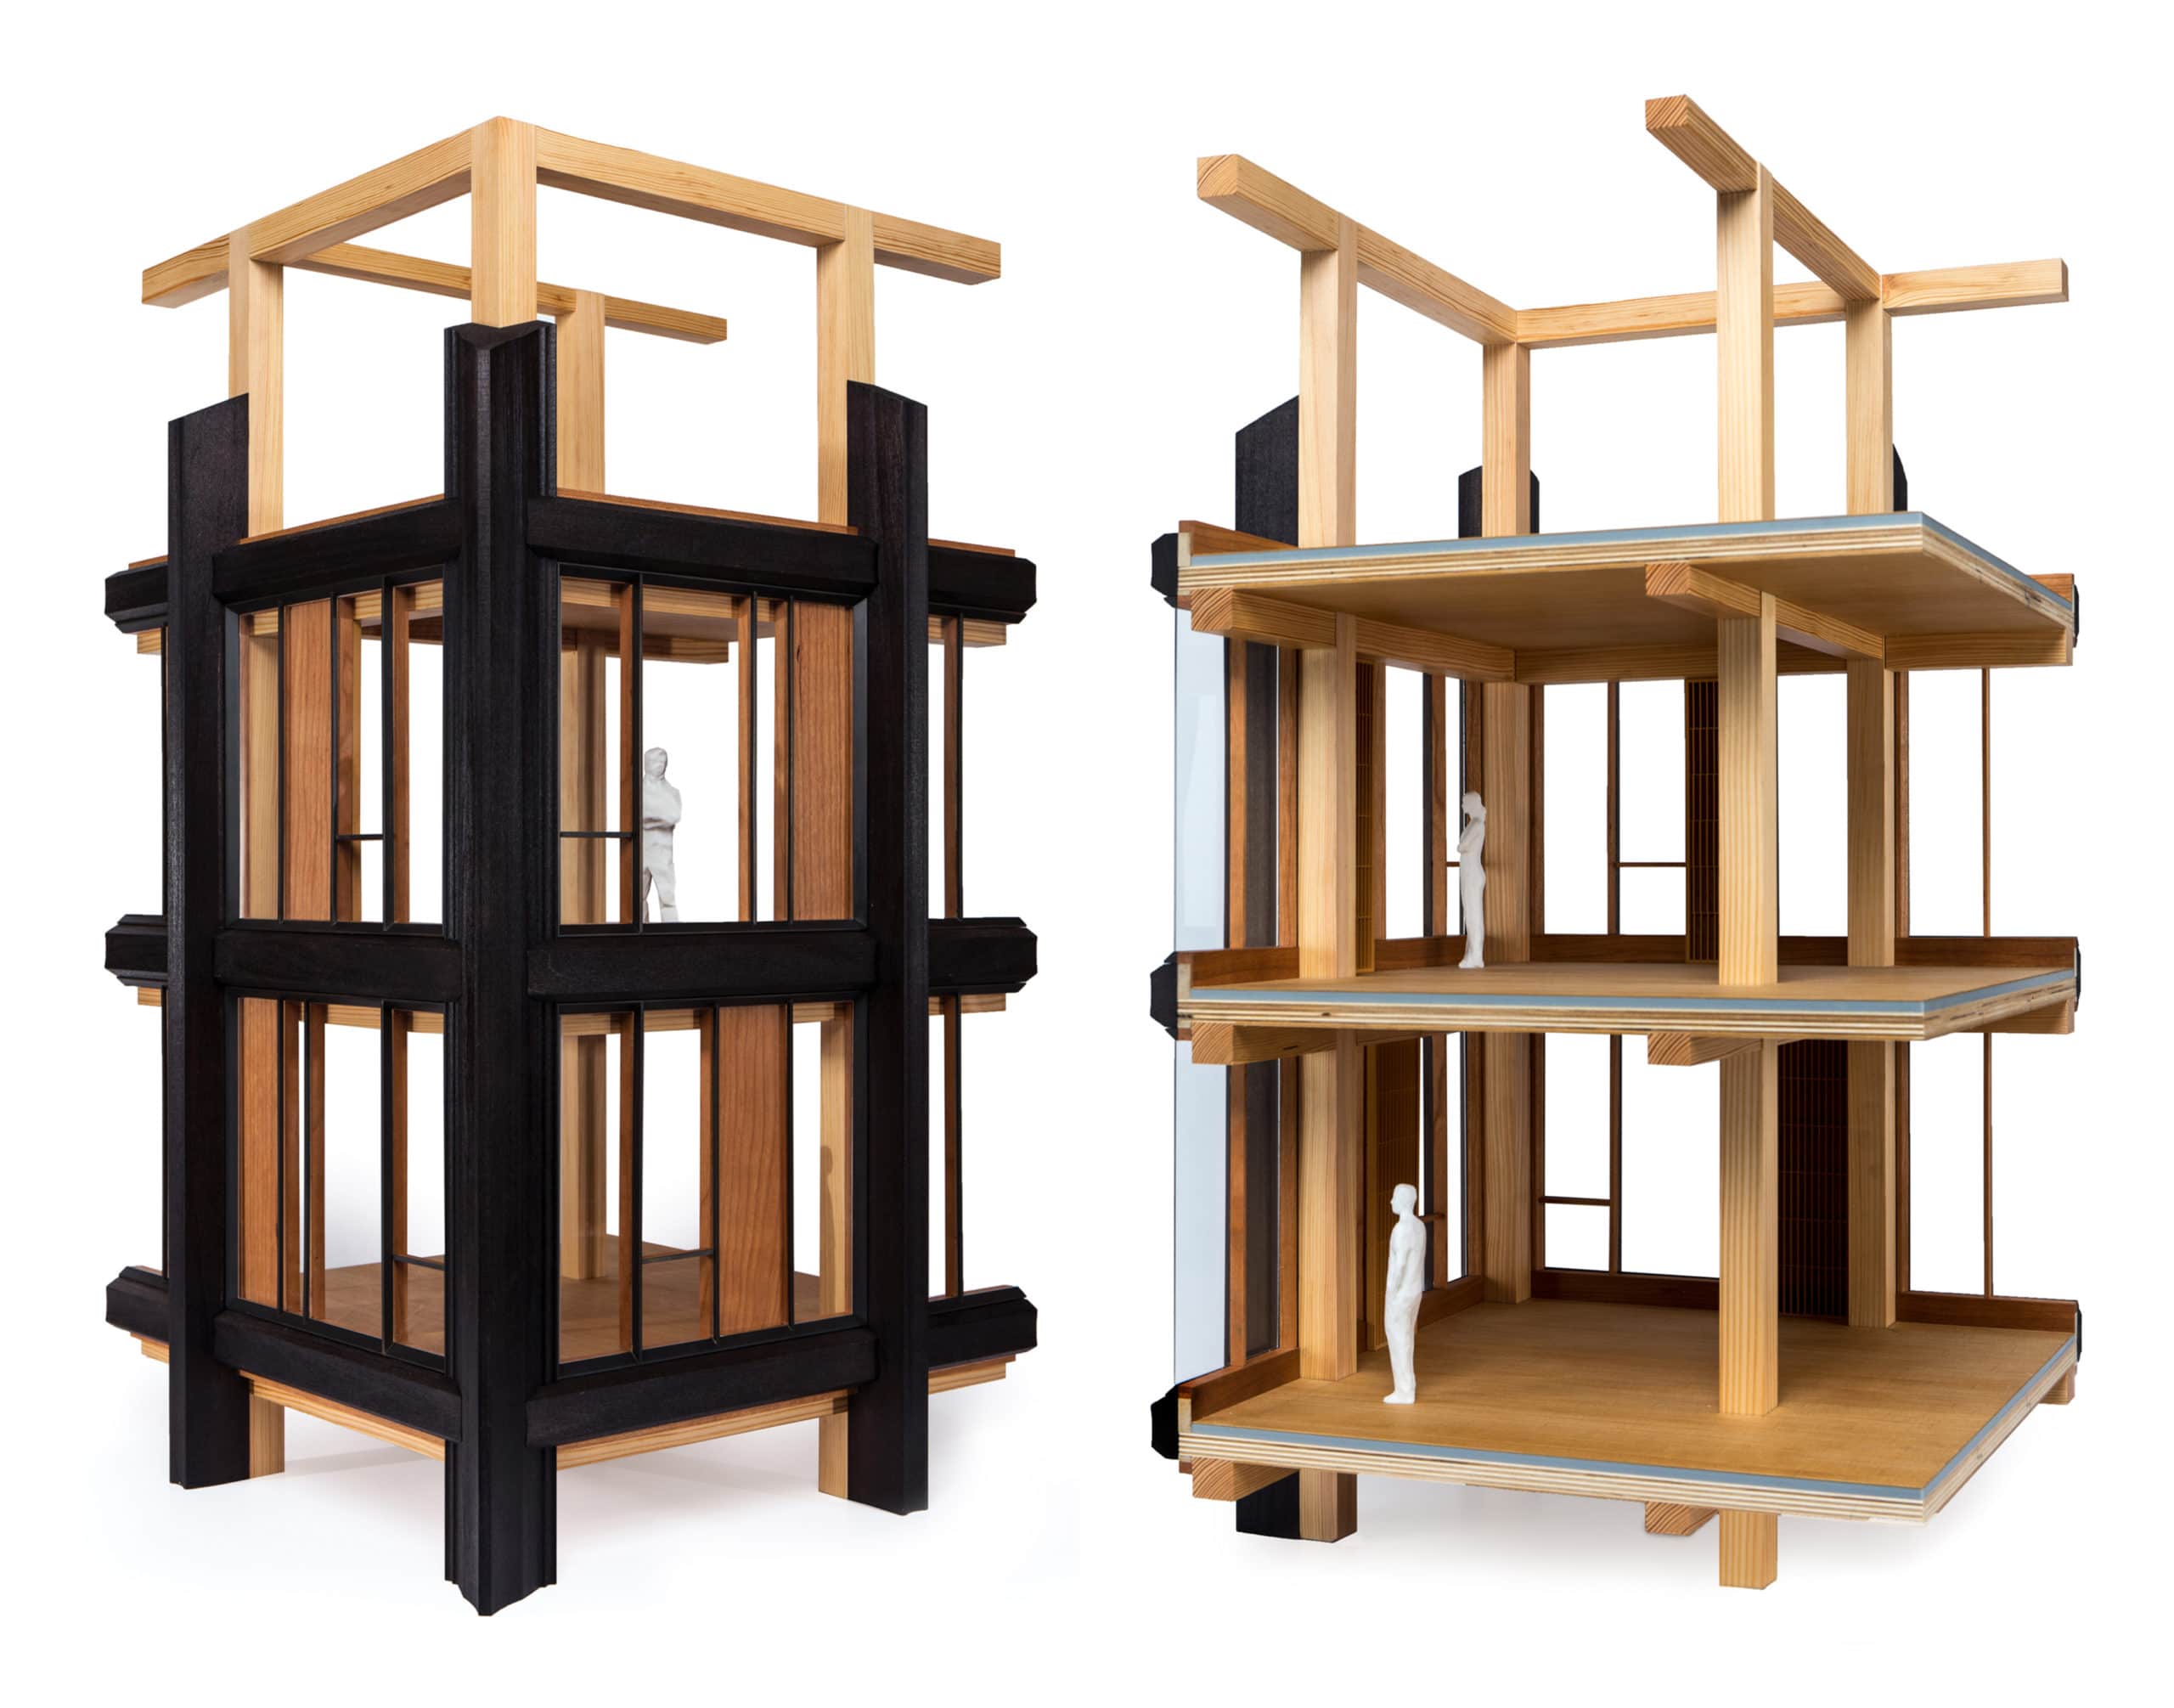 Tall Buildings Made From Wood? You Better Believe It